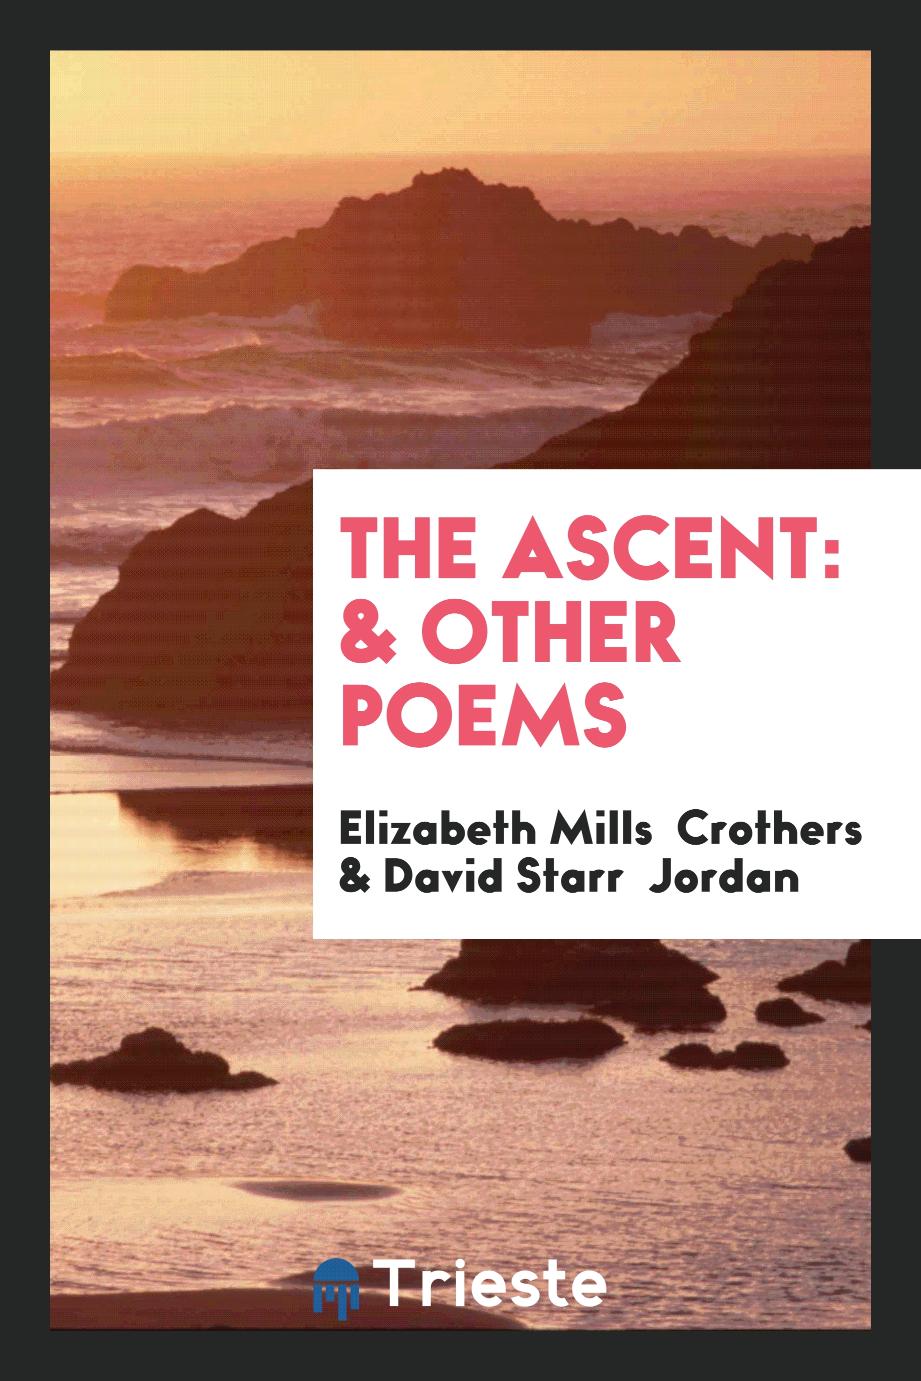 The ascent: & other poems